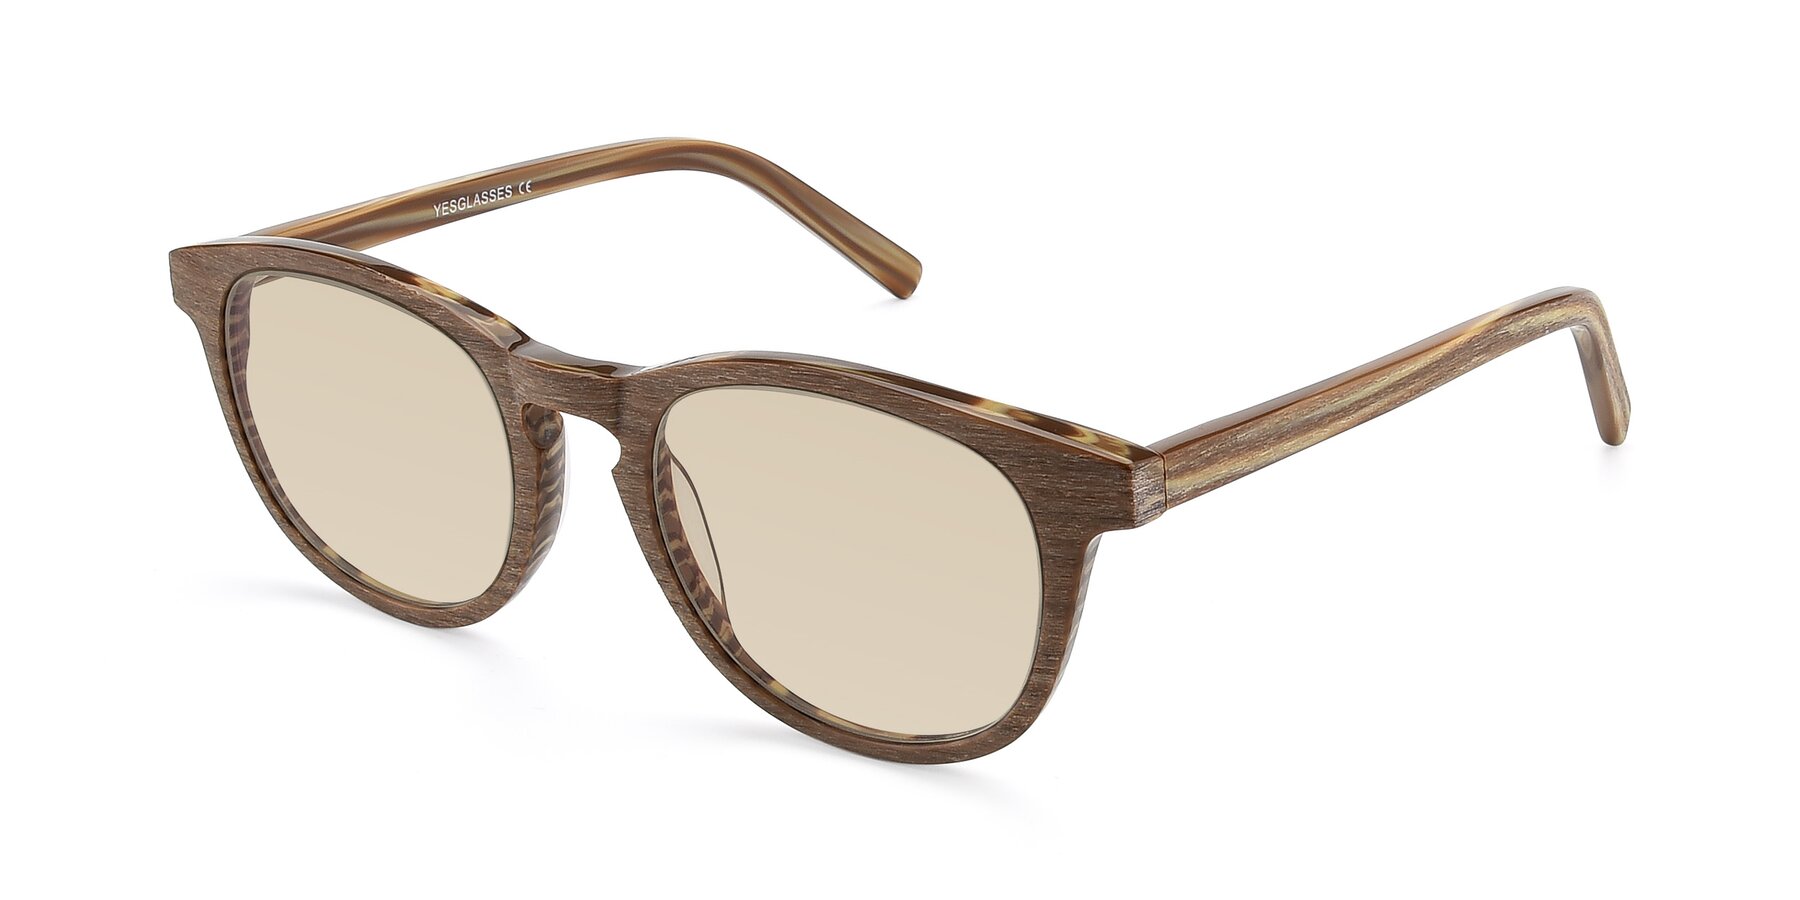 Angle of SR6044 in Brown-Wooden with Light Brown Tinted Lenses